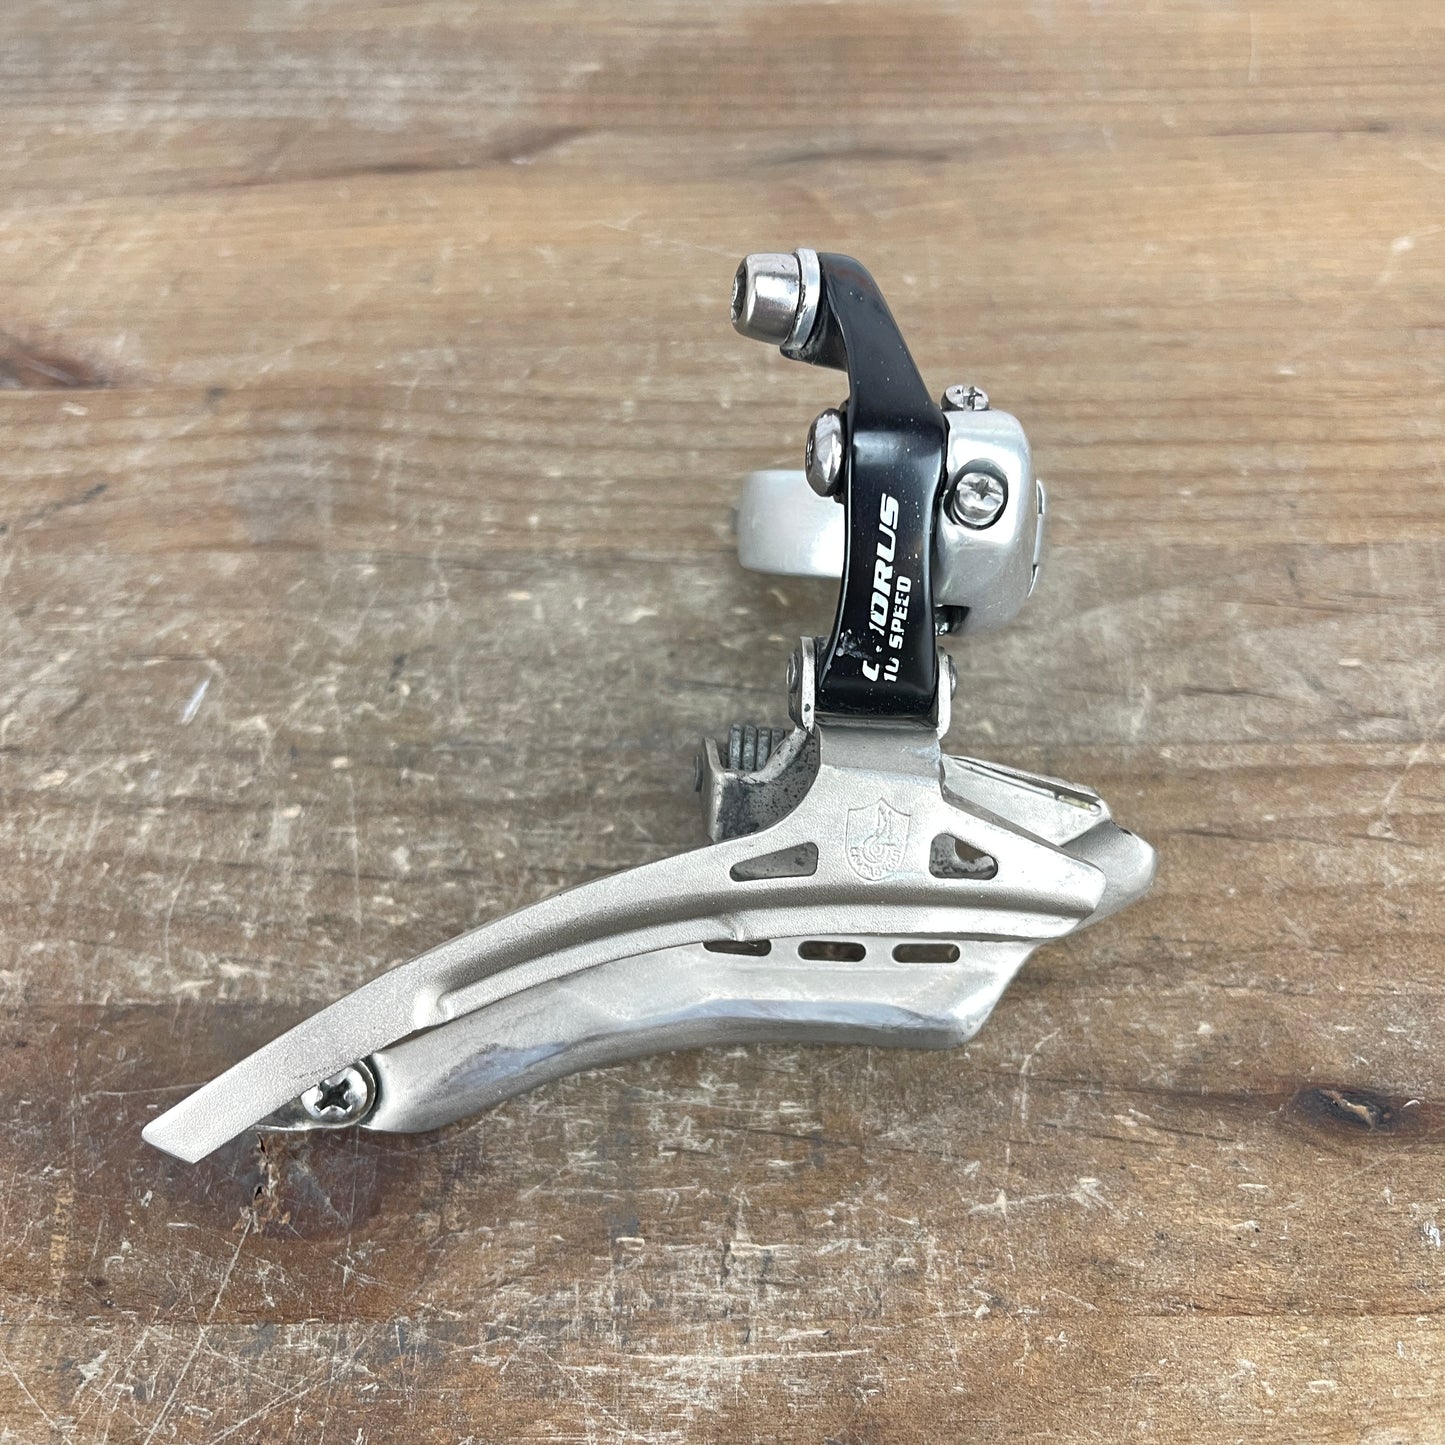 Campagnolo Chorus 10-Speed 35mm Clamp-On Road Bike Front Derailleur 110g